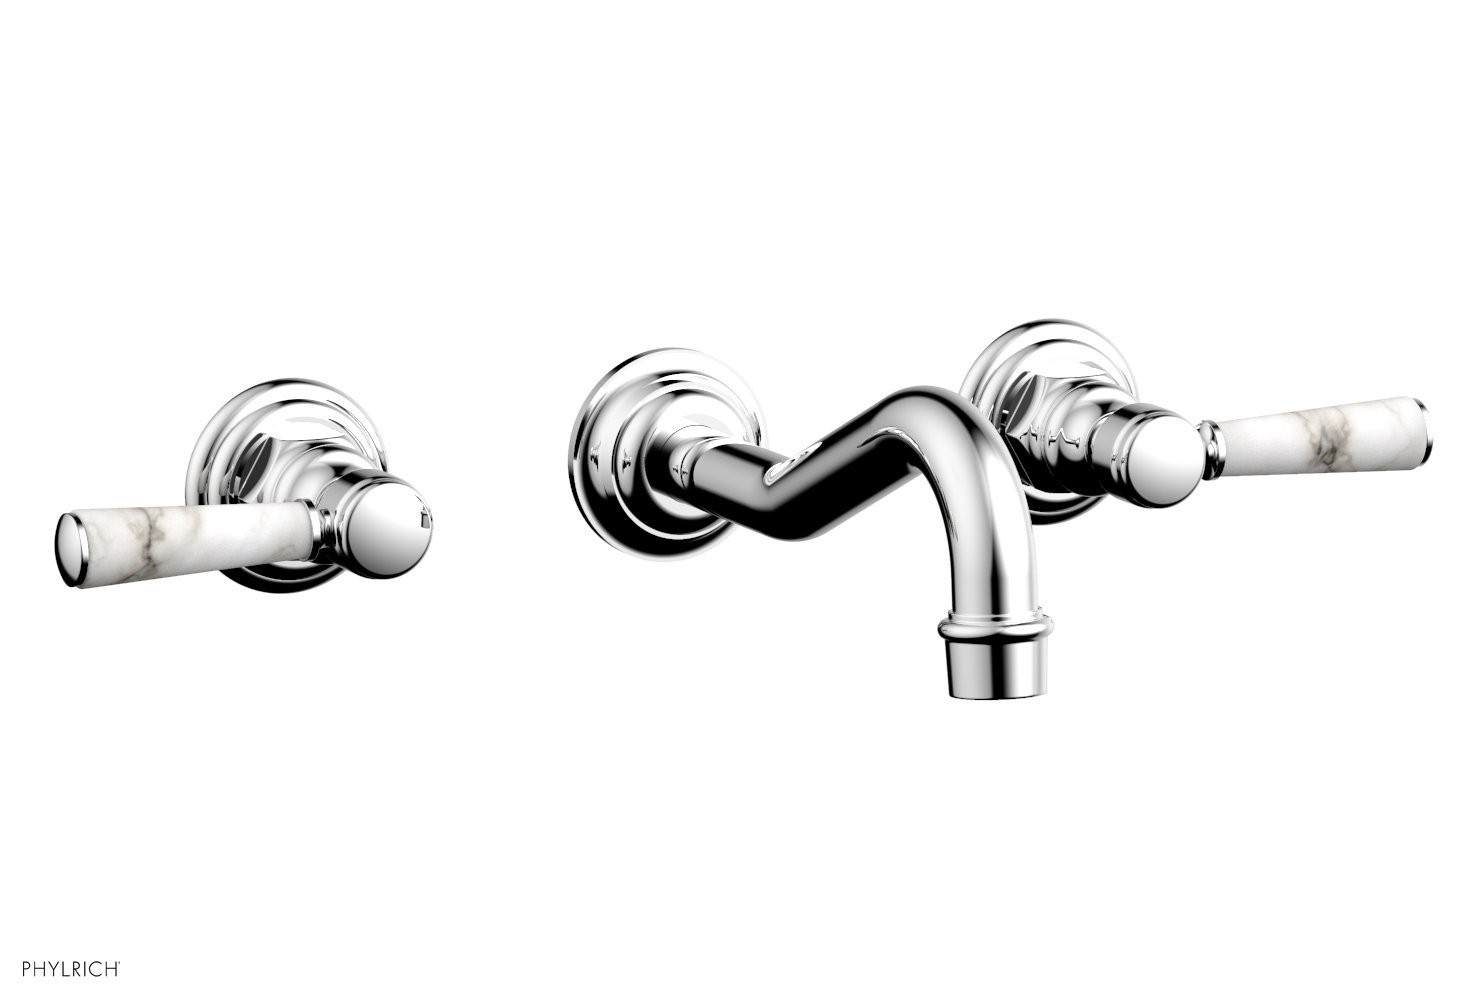 PHYLRICH 161-13-031 HENRI THREE HOLE WALL MOUNT BATHROOM FAUCET WITH WHITE MARBLE LEVER HANDLES